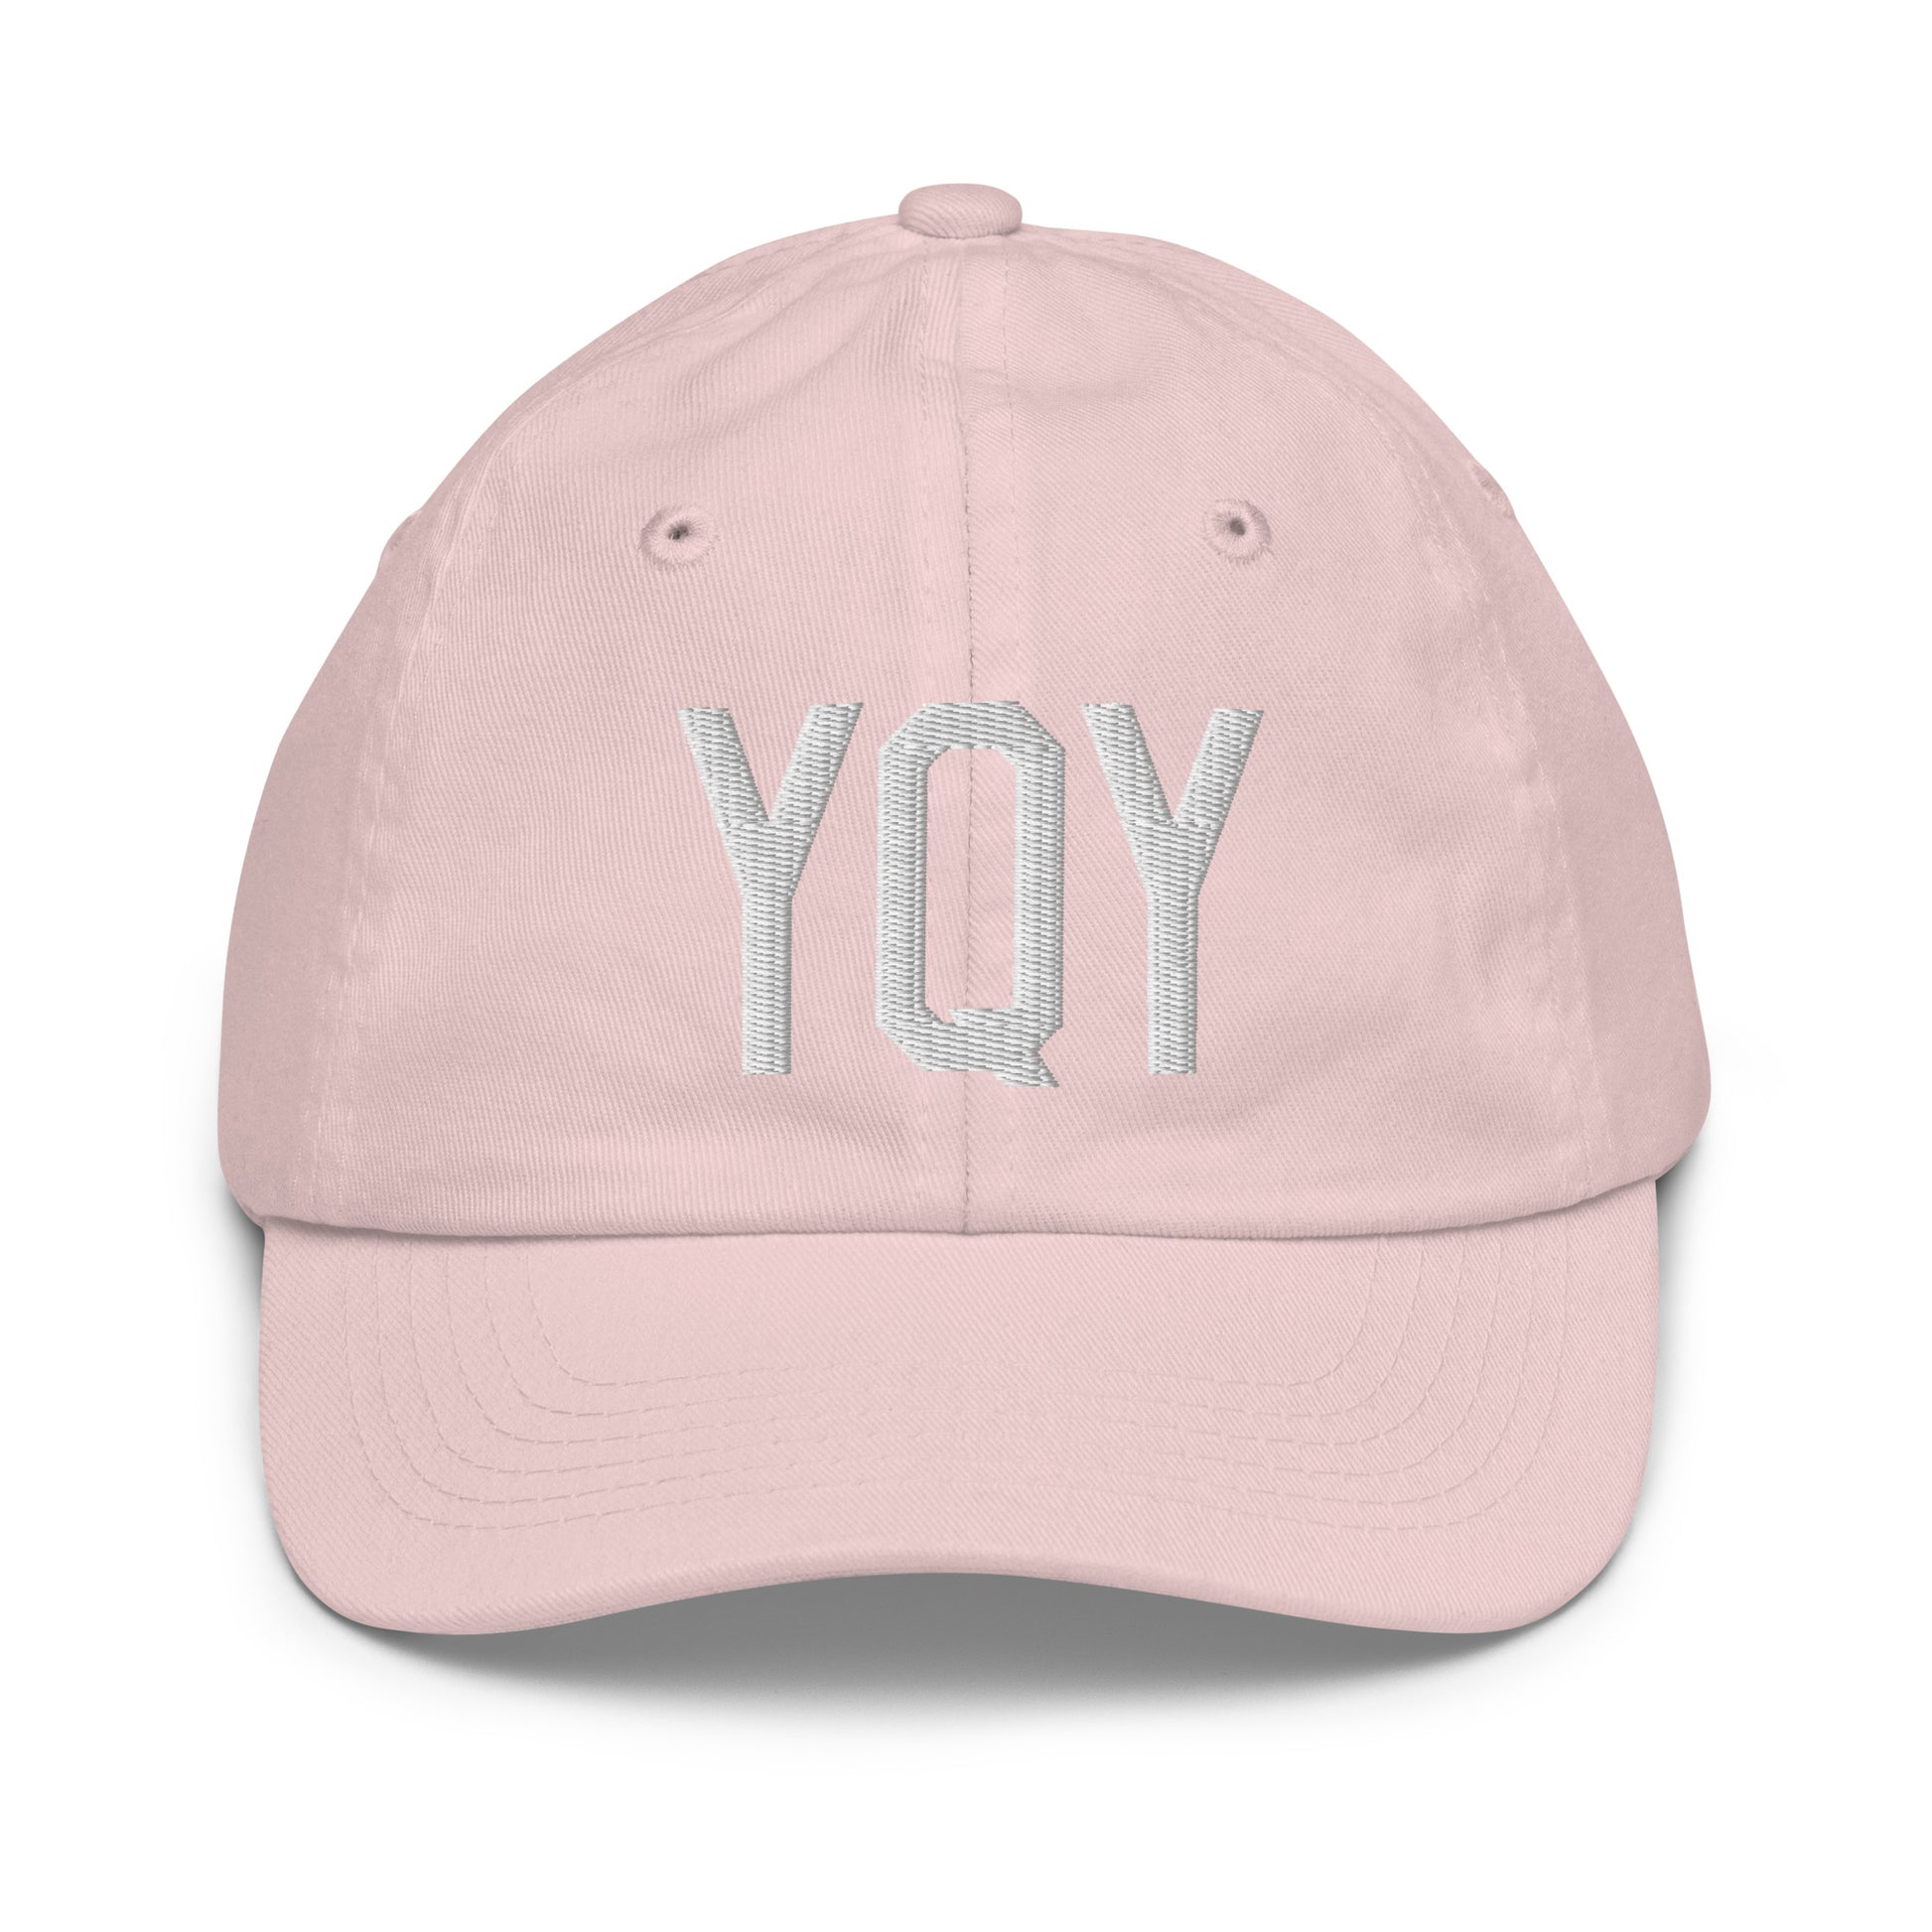 Airport Code Kid's Baseball Cap - White • YQY Sydney • YHM Designs - Image 31